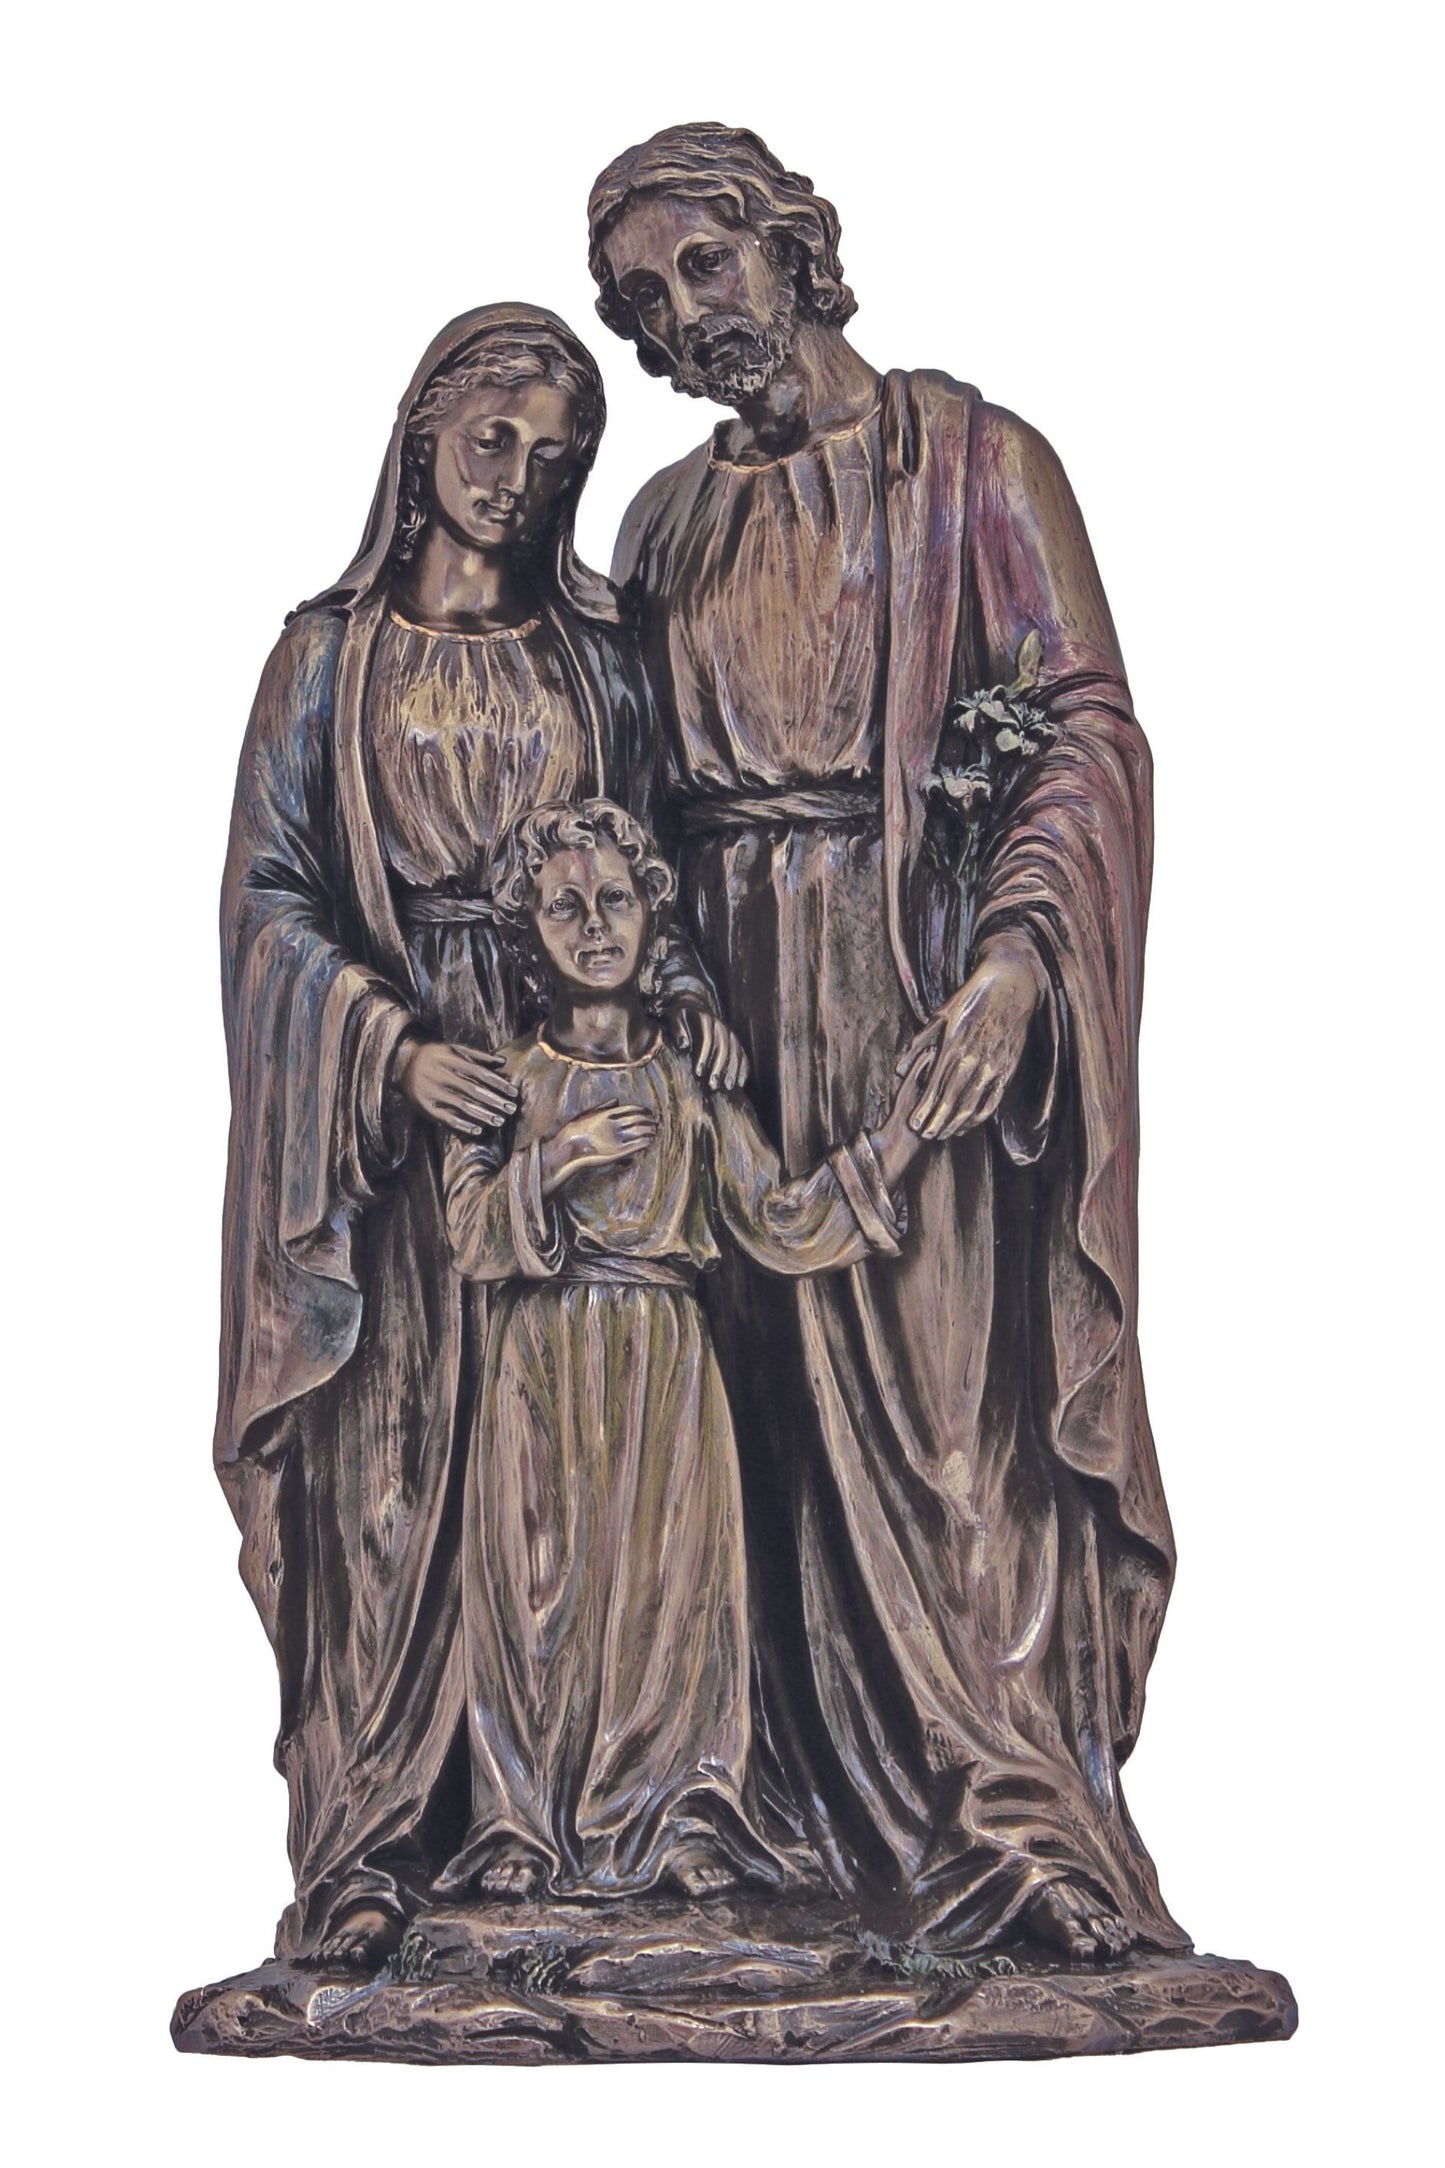 SR-76164 Holy Family in Cold Cast Bronze 5x10"